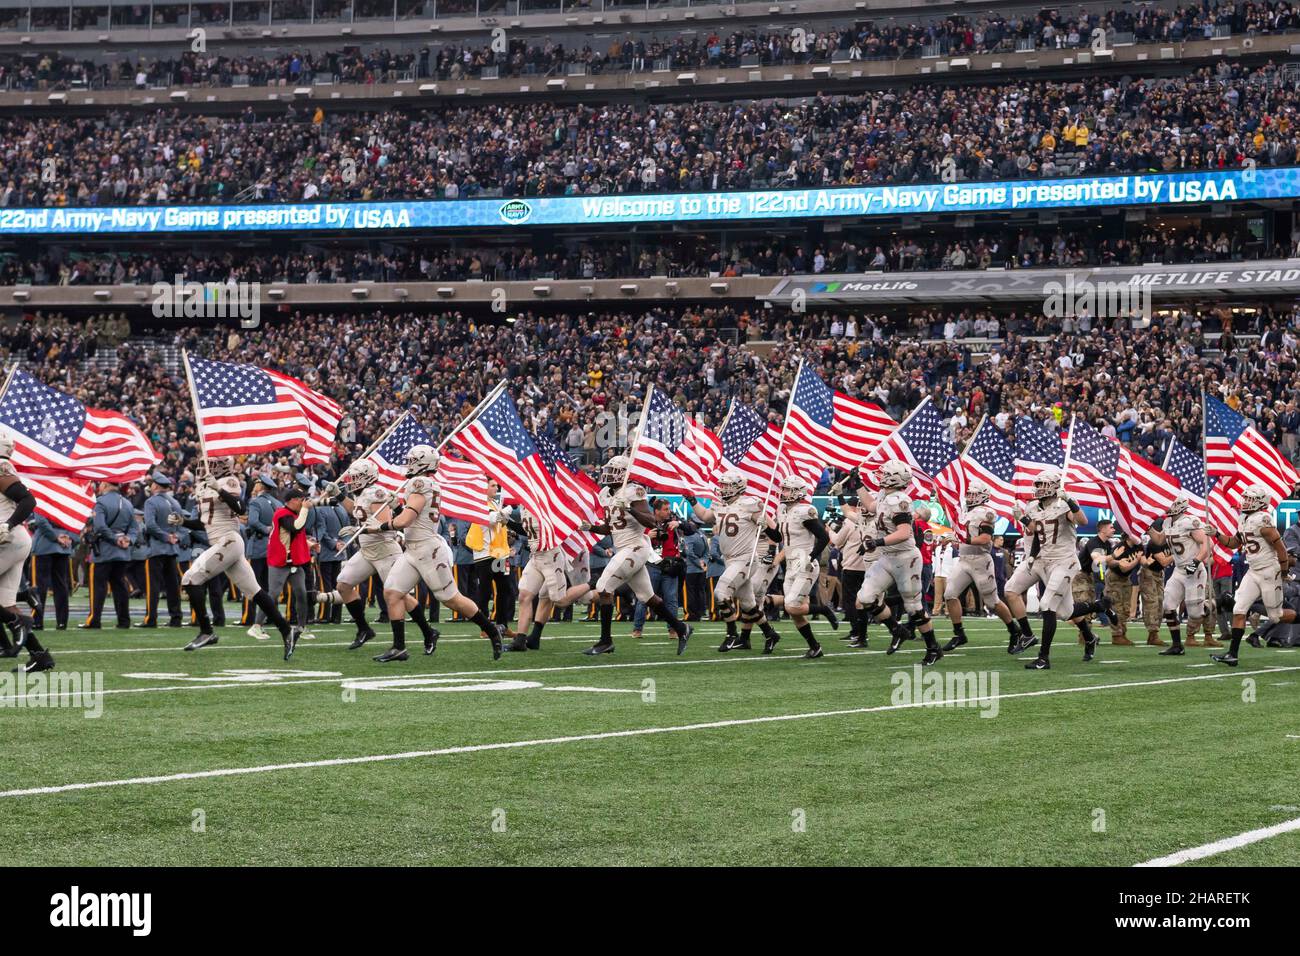 East Rutherford, United States of America. 11 December, 2021. U.S. West Point Military Academy Black Knights, run on to the field at the start of the annual Army-Navy football game at Metlife Stadium December 11, 2021 in East Rutherford, New Jersey. The U.S. Naval Academy Midshipmen defeated the Army Black Knights 17-13 in their 122nd matchup.  Credit: CDT Tyler Williams/U.S. Army Photo/Alamy Live News Stock Photo